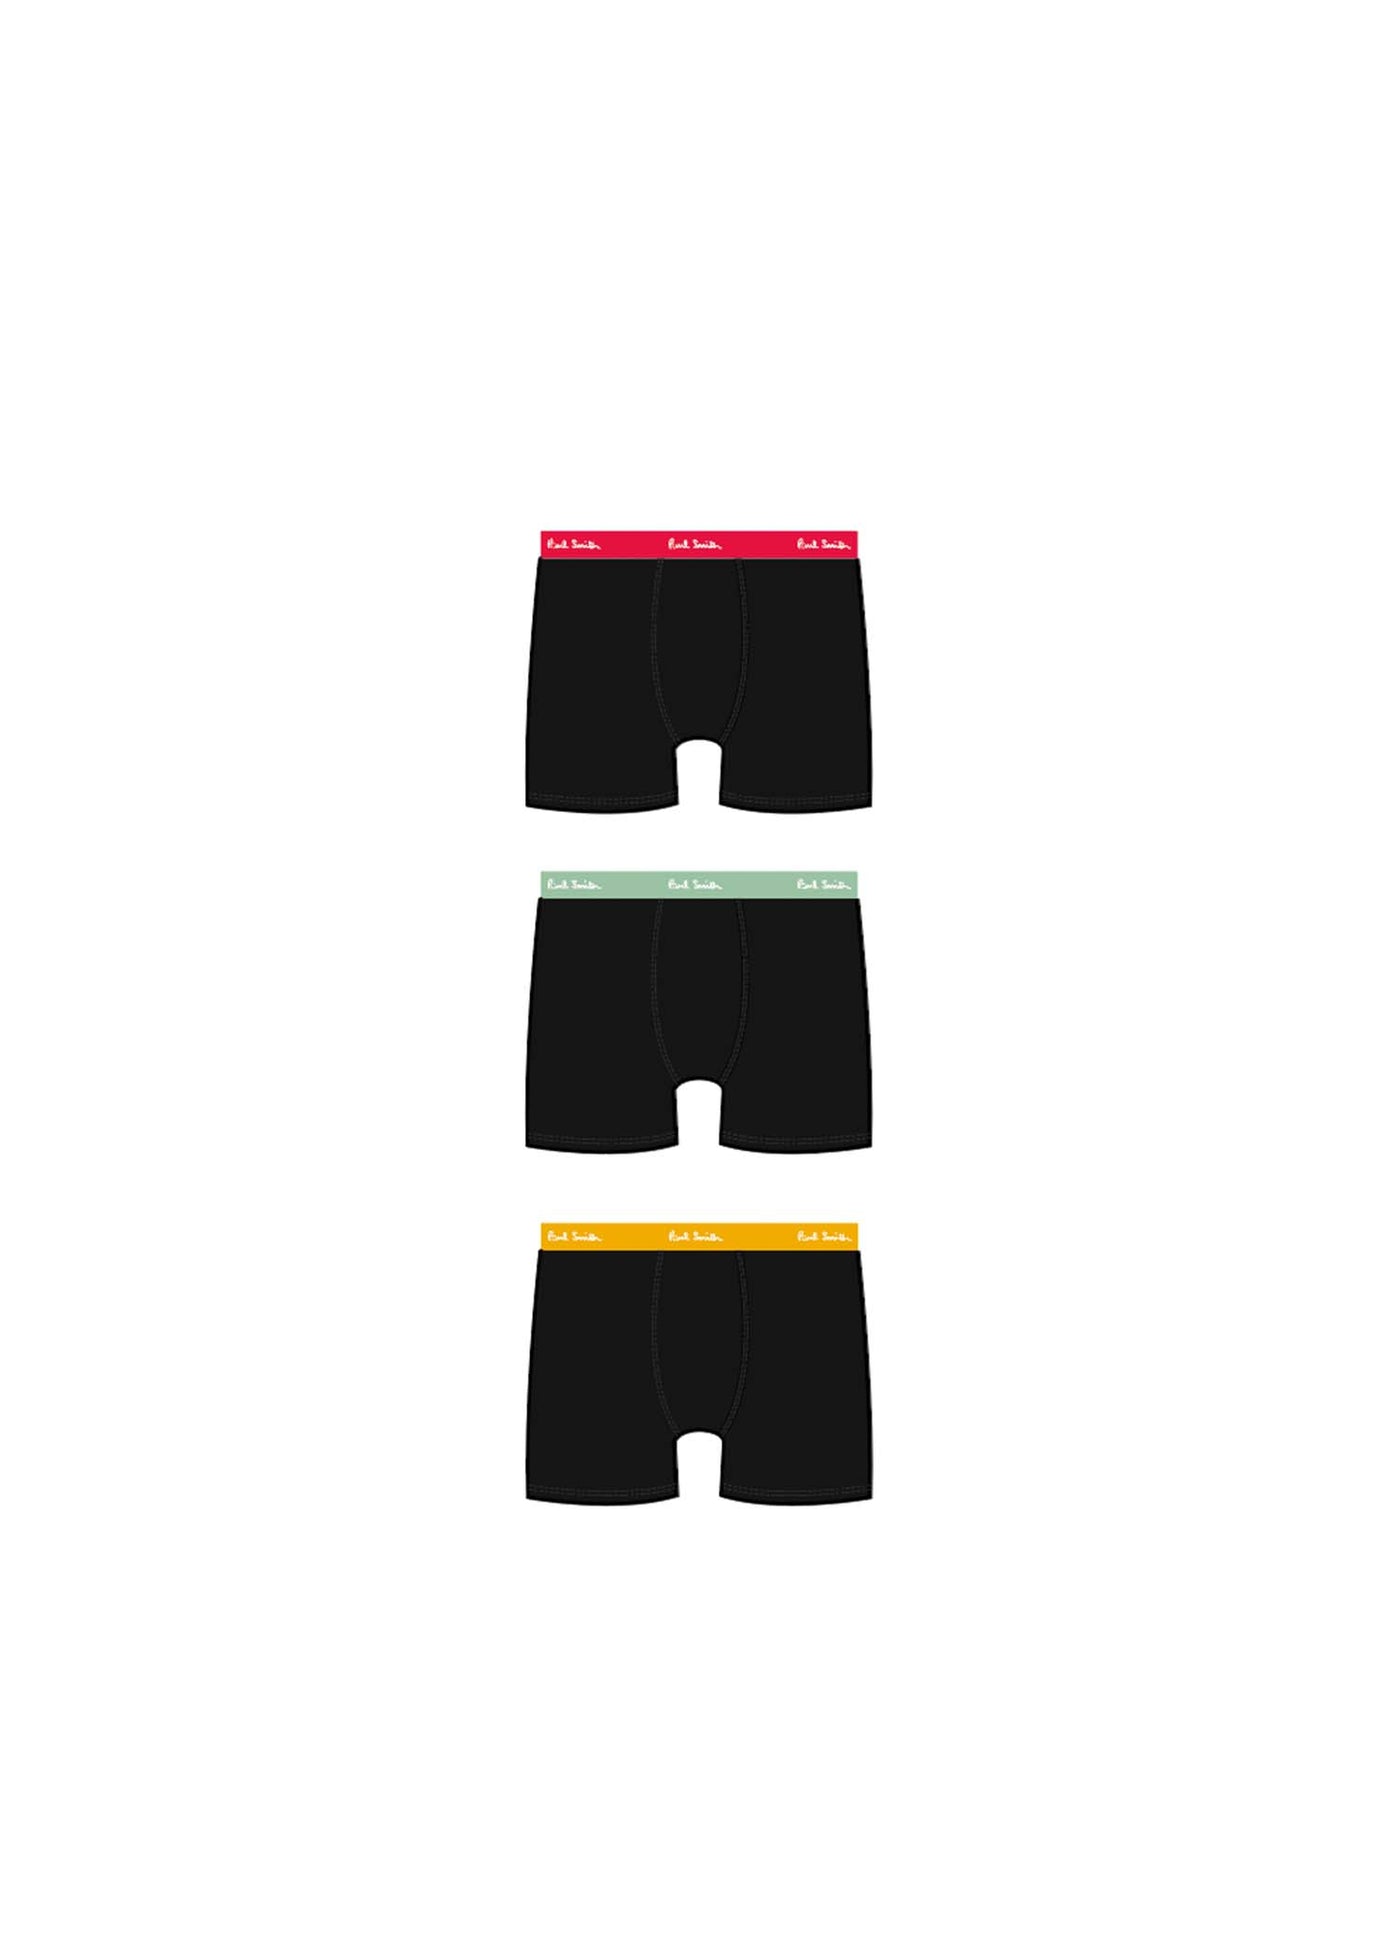 Paul Smith Boxer 3 Pack | Red / Yellow / Green